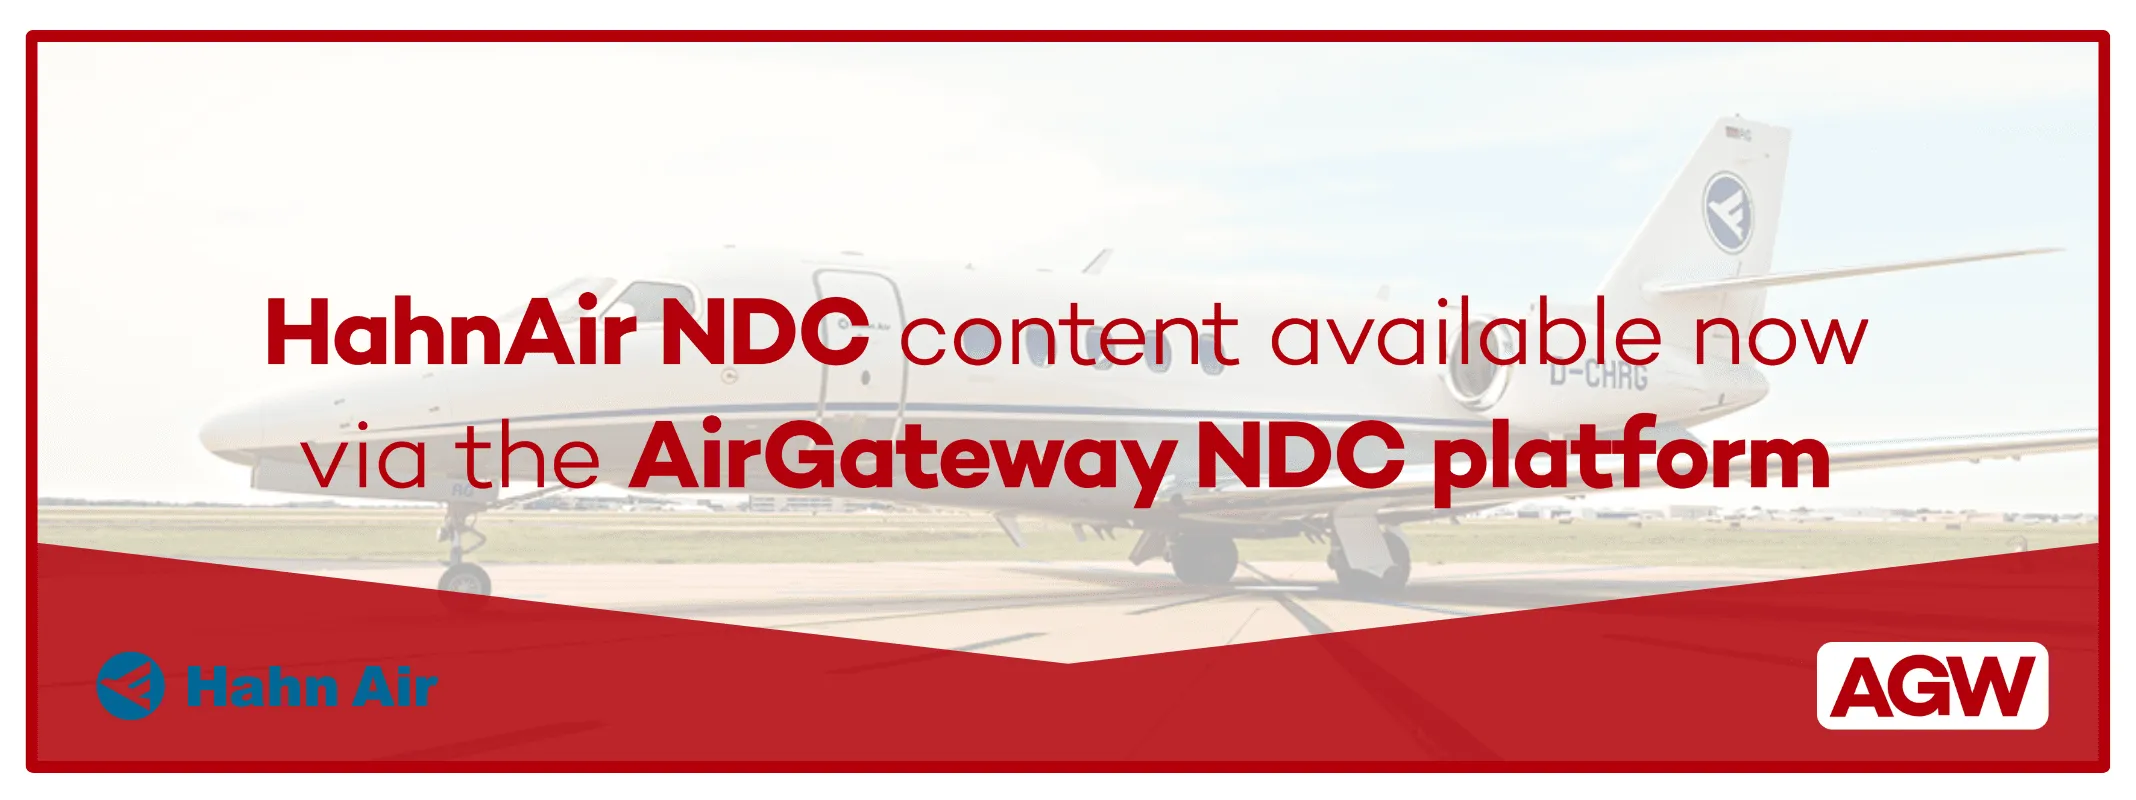 Hahn air NDC Content now available through NDC platform